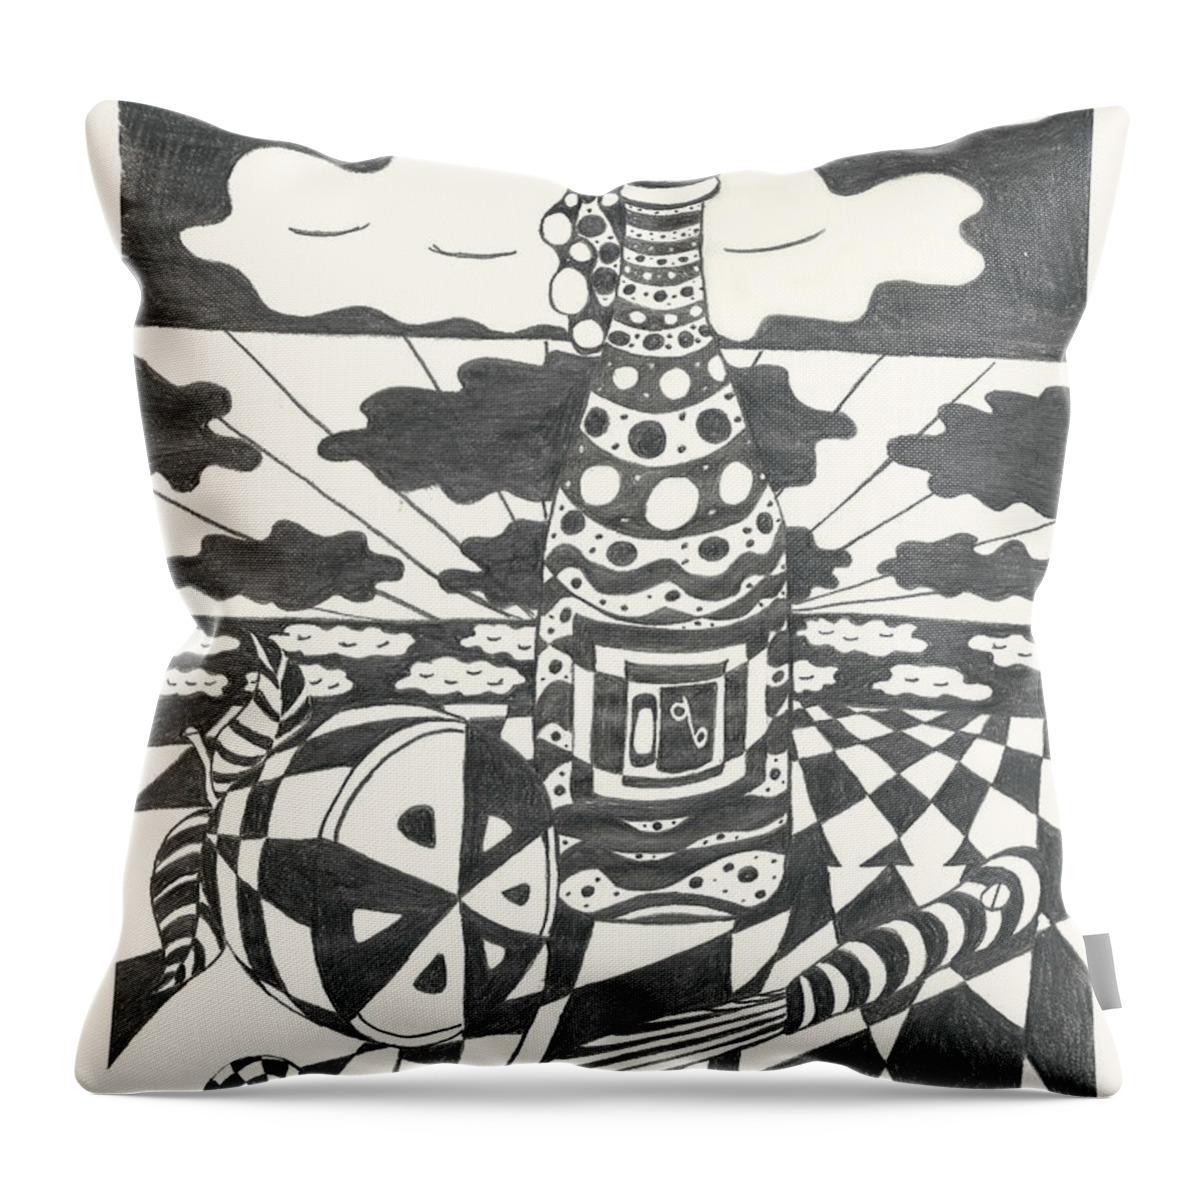 Pattern Throw Pillow featuring the drawing Picnic by Melinda Dare Benfield